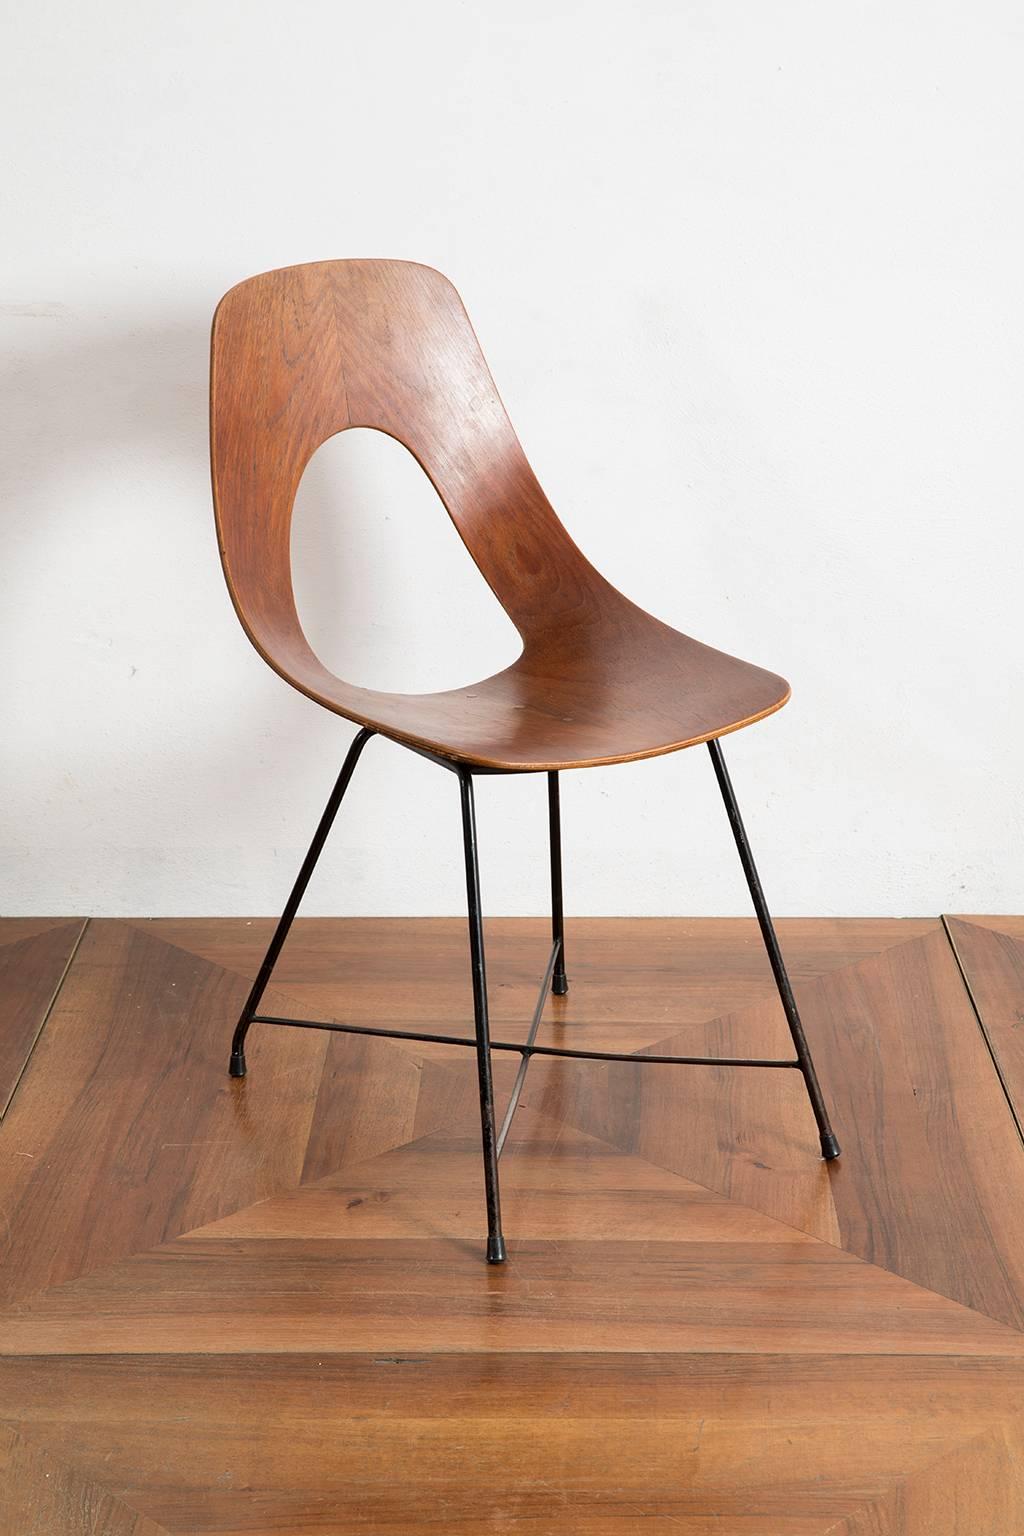 Rare set of six 'Ariston' chairs designed by Augusto Bozzi in 1957 and manufactured by Saporiti, Italy. This set is made out of a solid bend plywood piece of teak have a very elegant shape, which provides them with a very clean cut line. Equipped